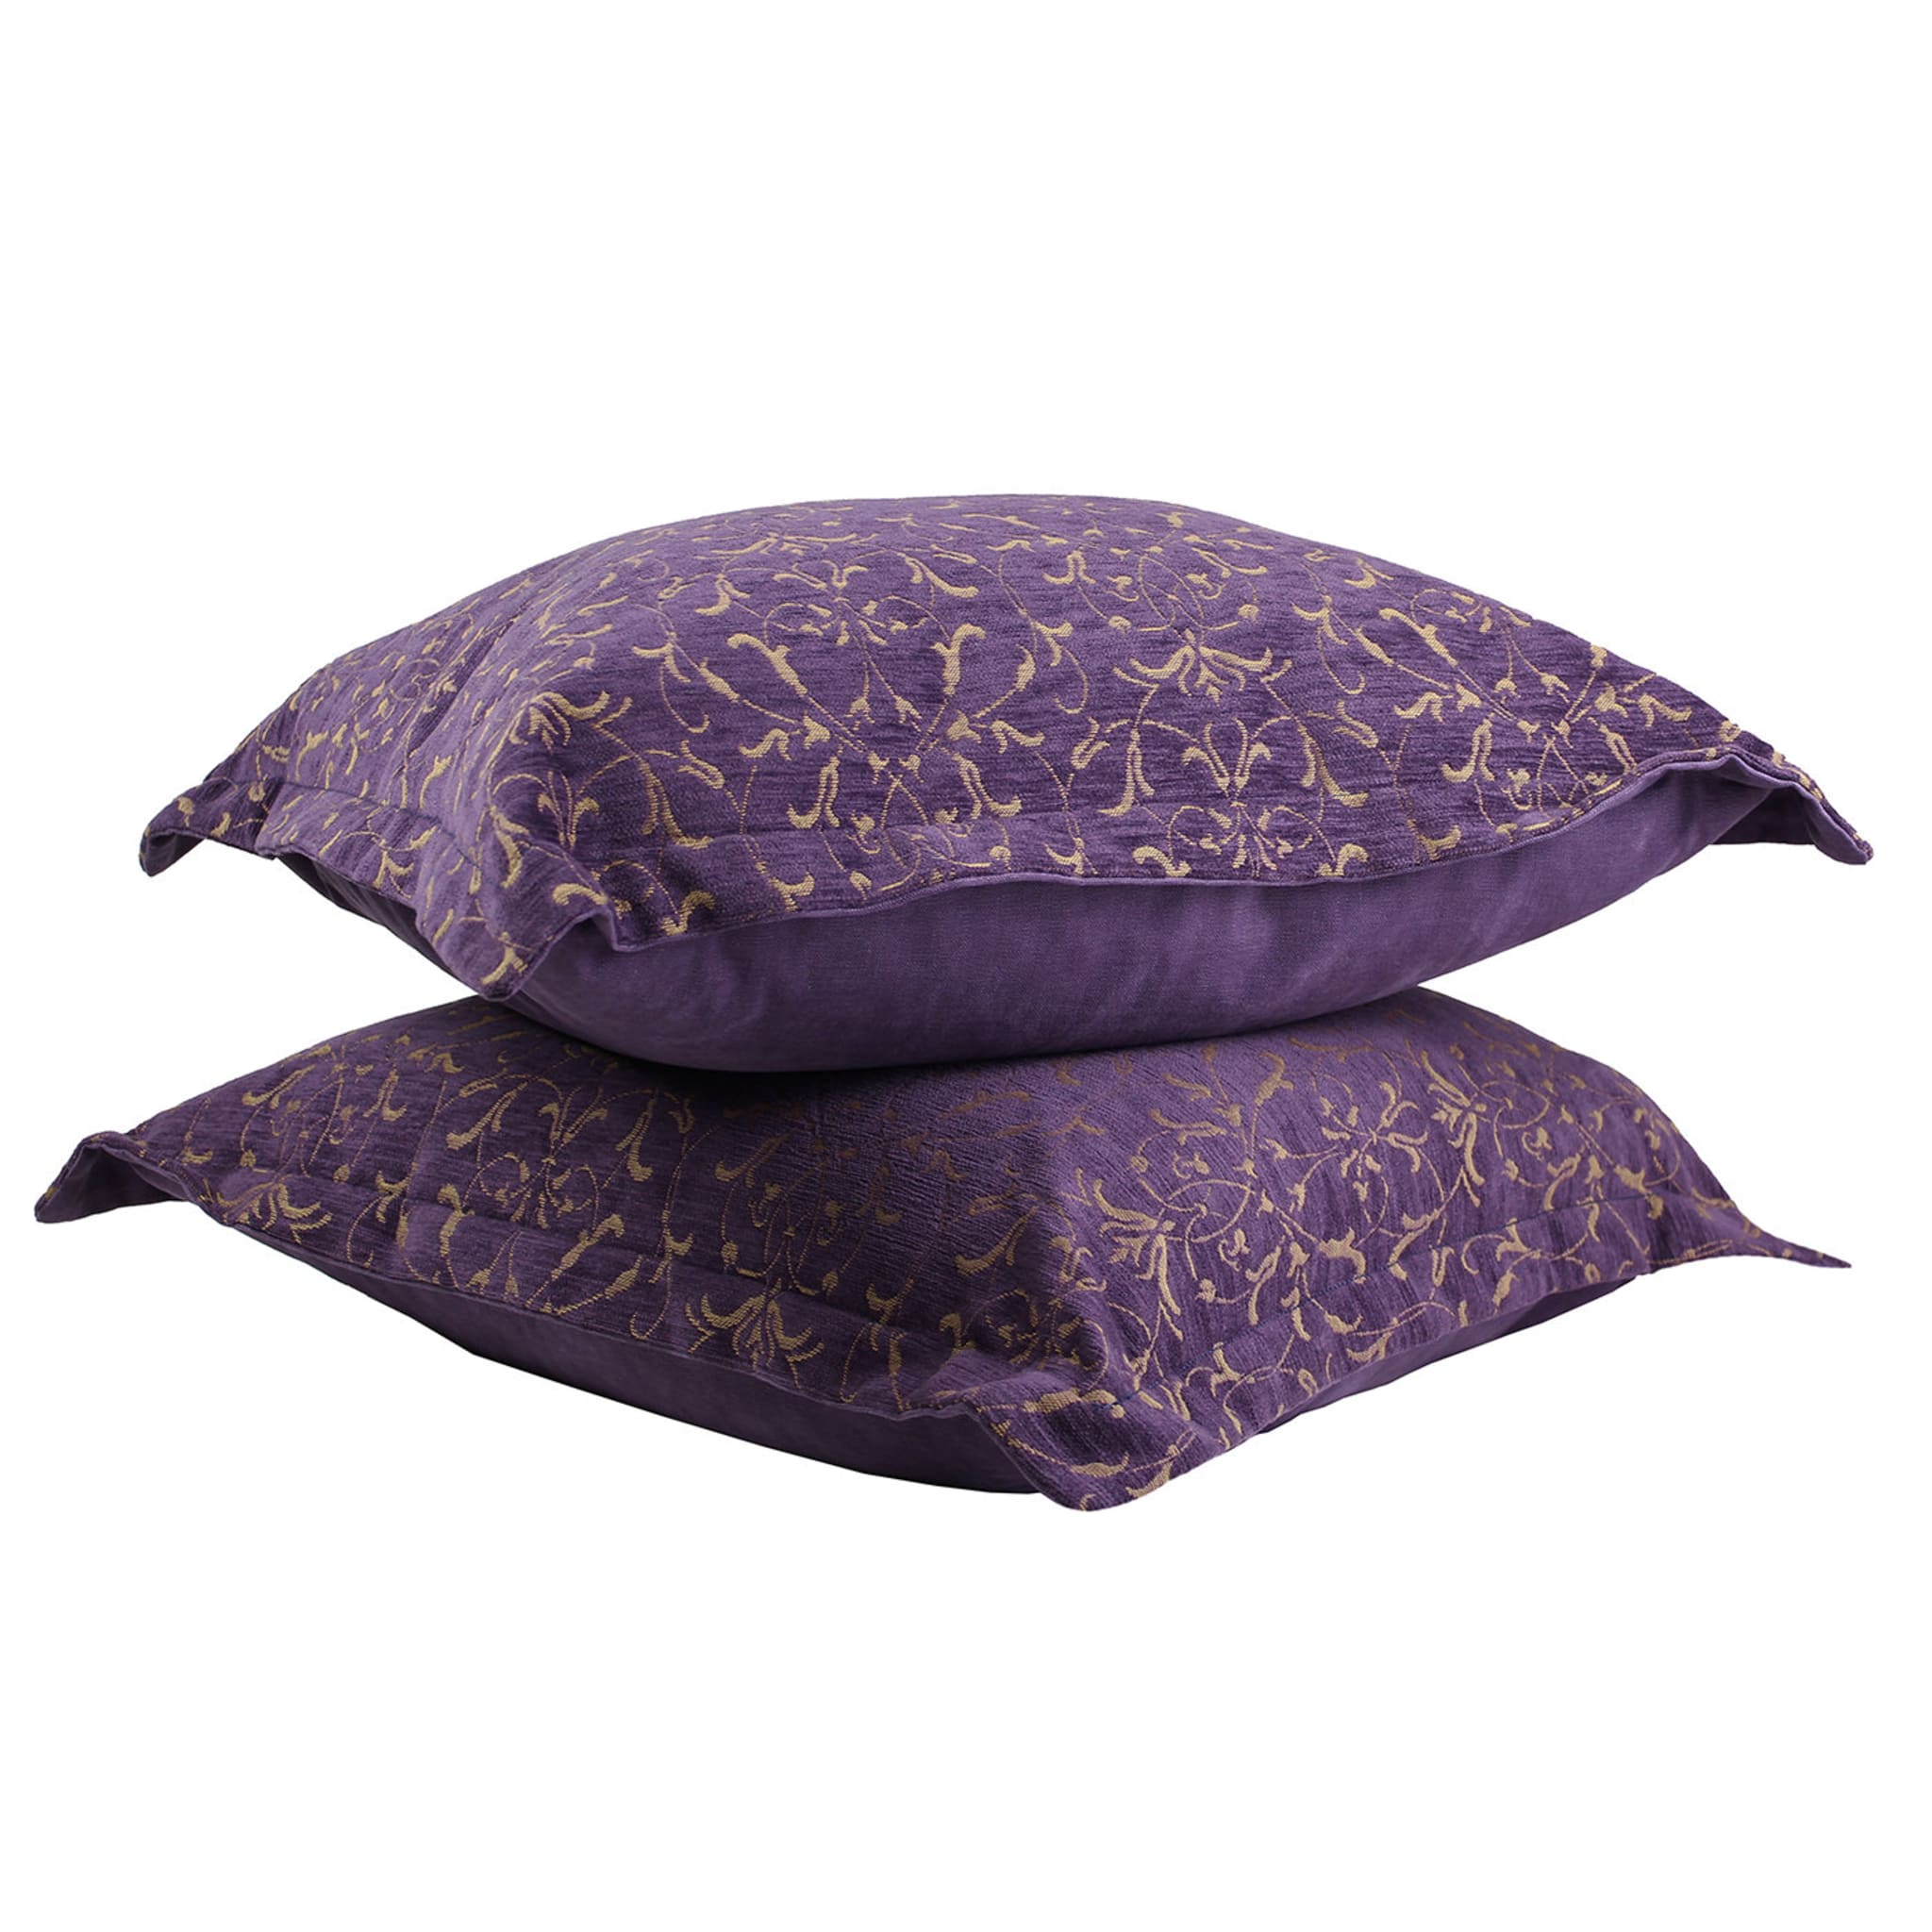 Set of 2 Over-Sized Purple Damascus Cushions  - Alternative view 1